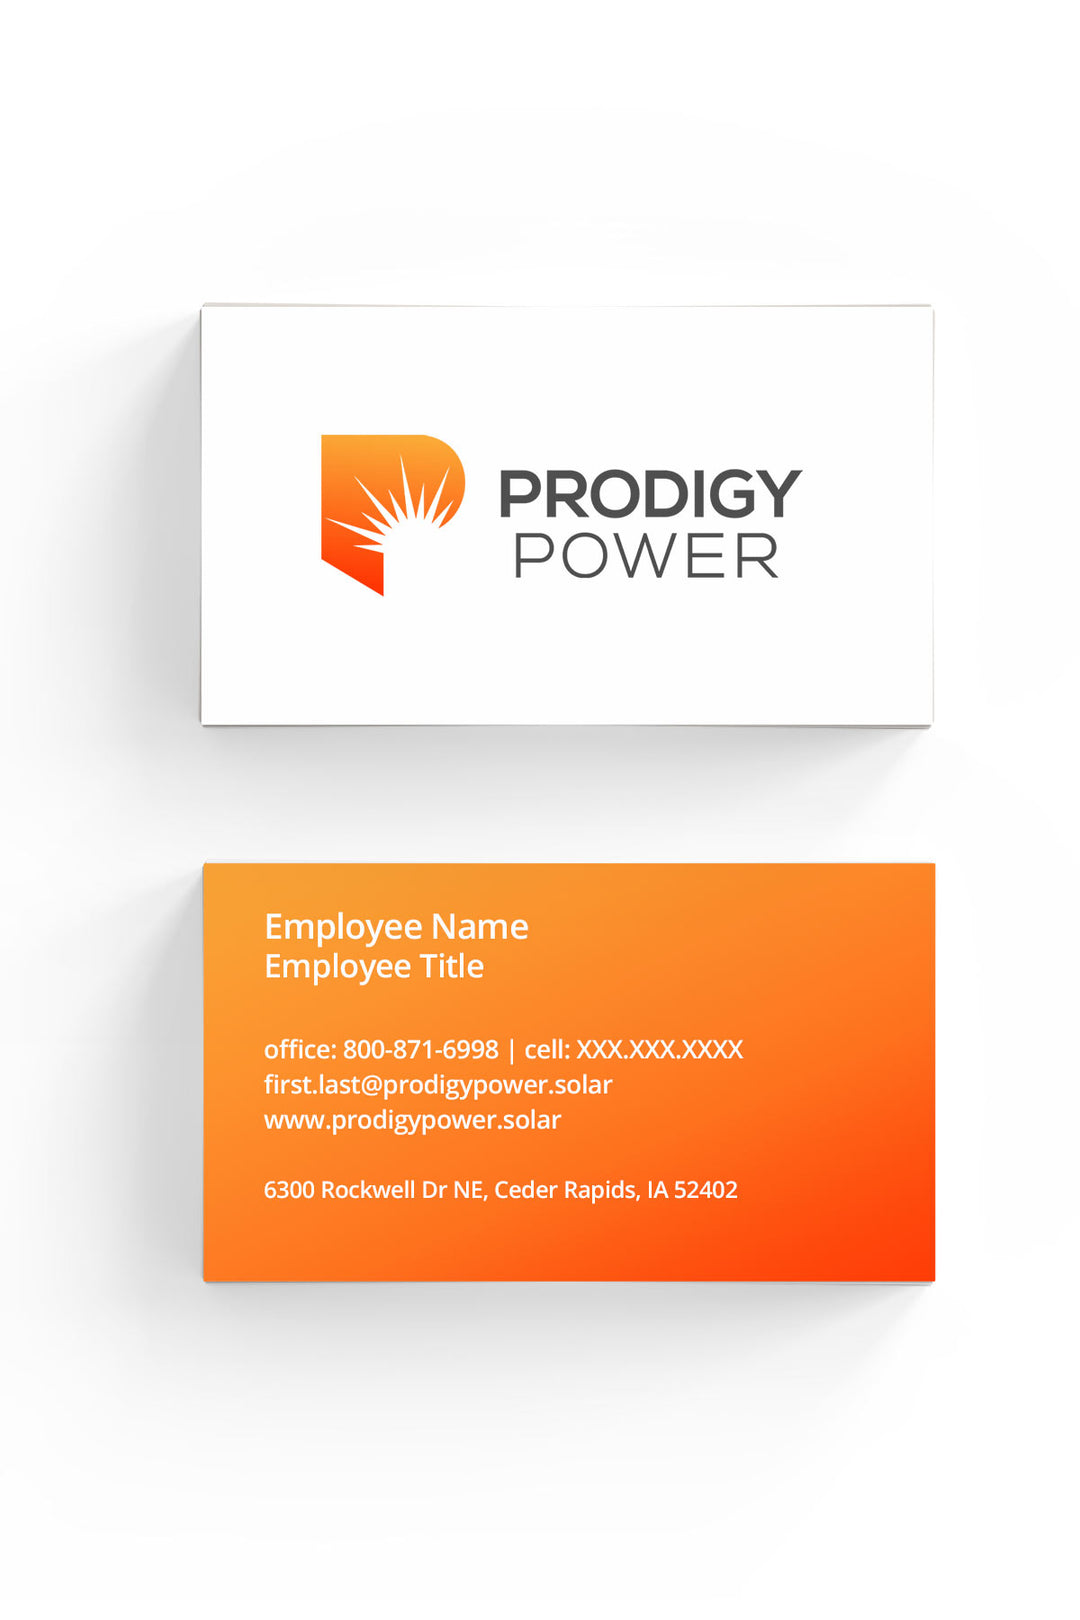 Prodigy Power Business Cards